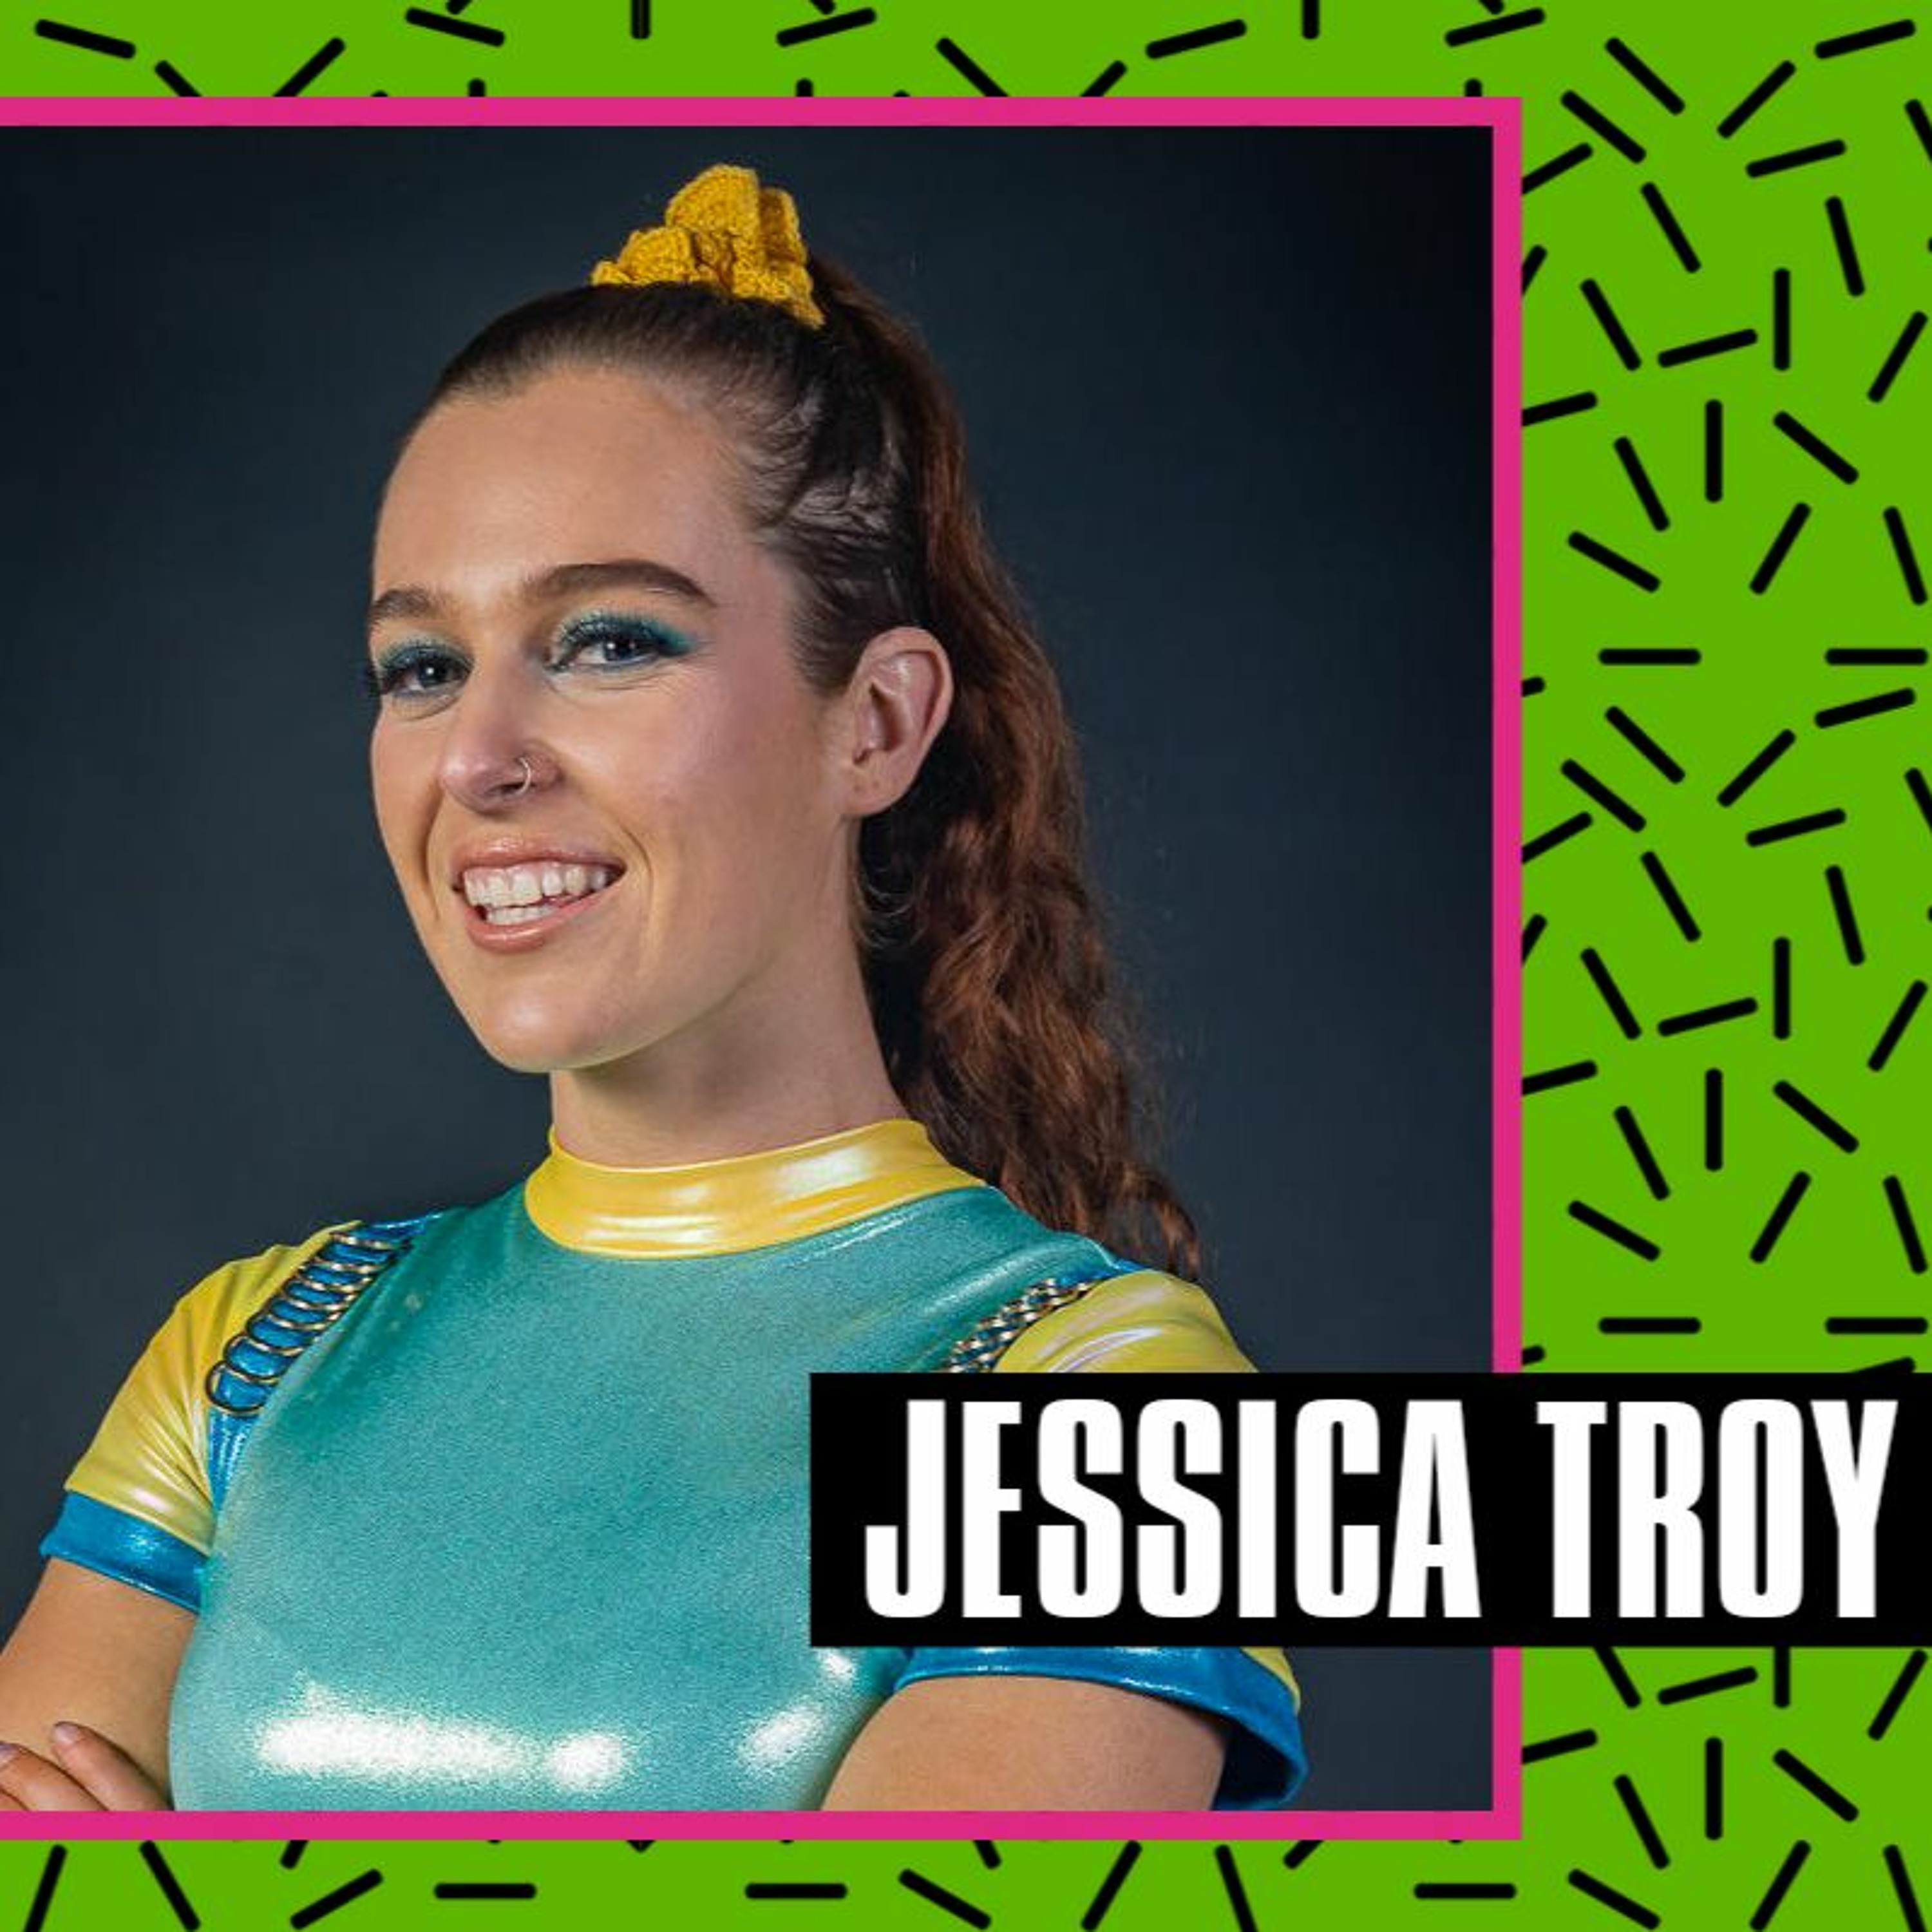 Jessica Troy on facing Tenille Dashwood, match with Zack Sabre Jr., NWA World Is A Vampire